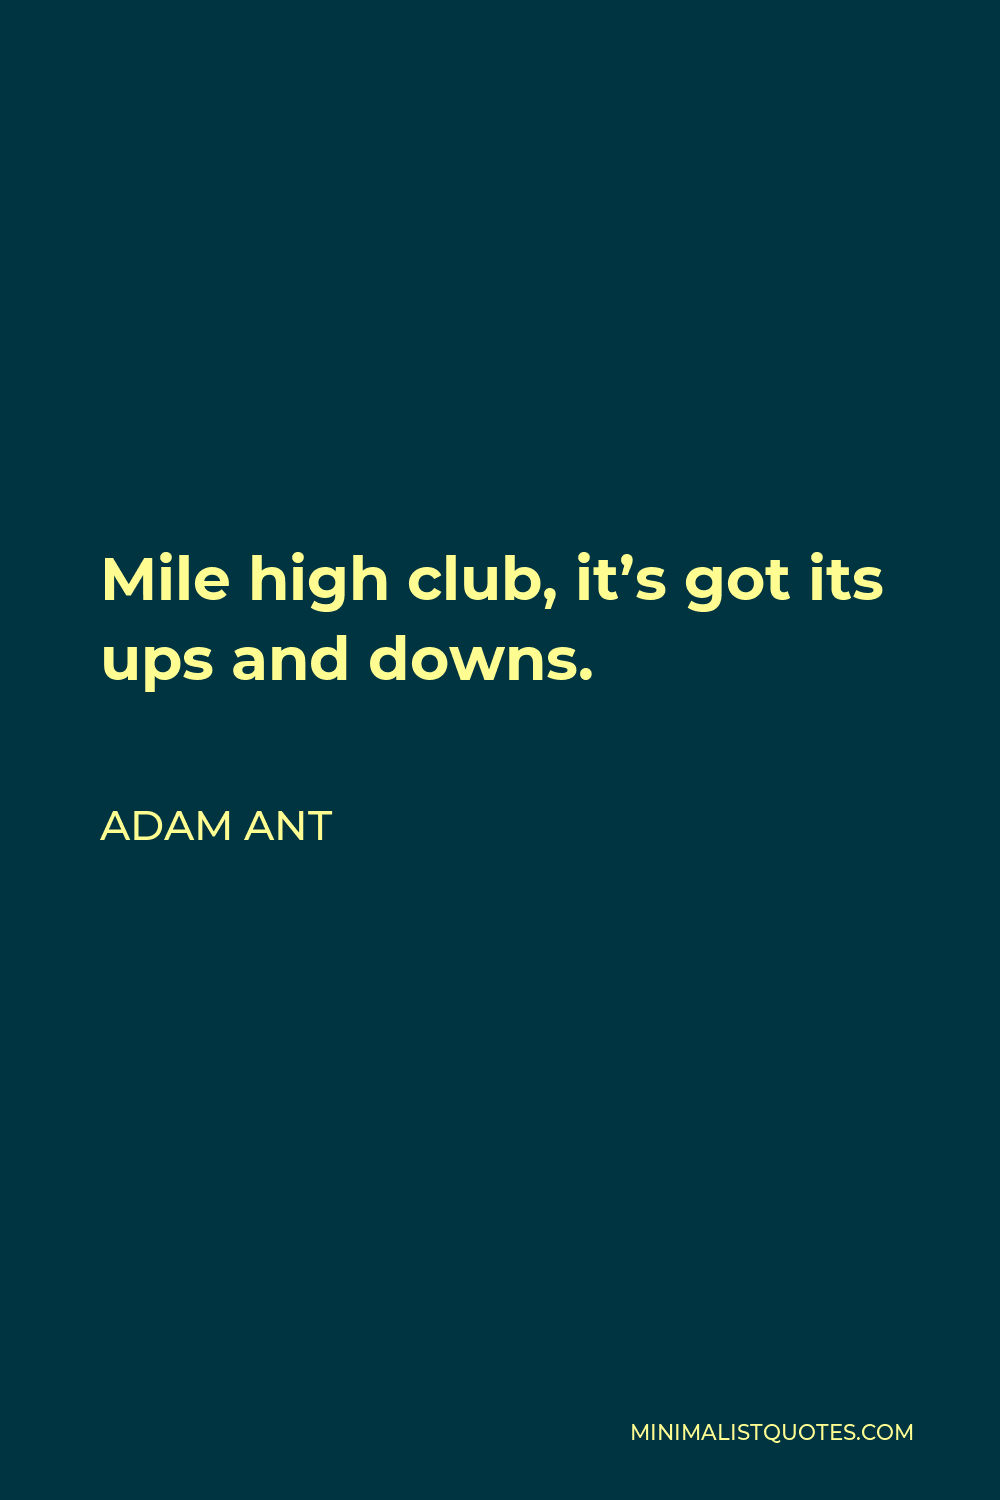 Adam Ant Quote - Mile high club, it’s got its ups and downs.